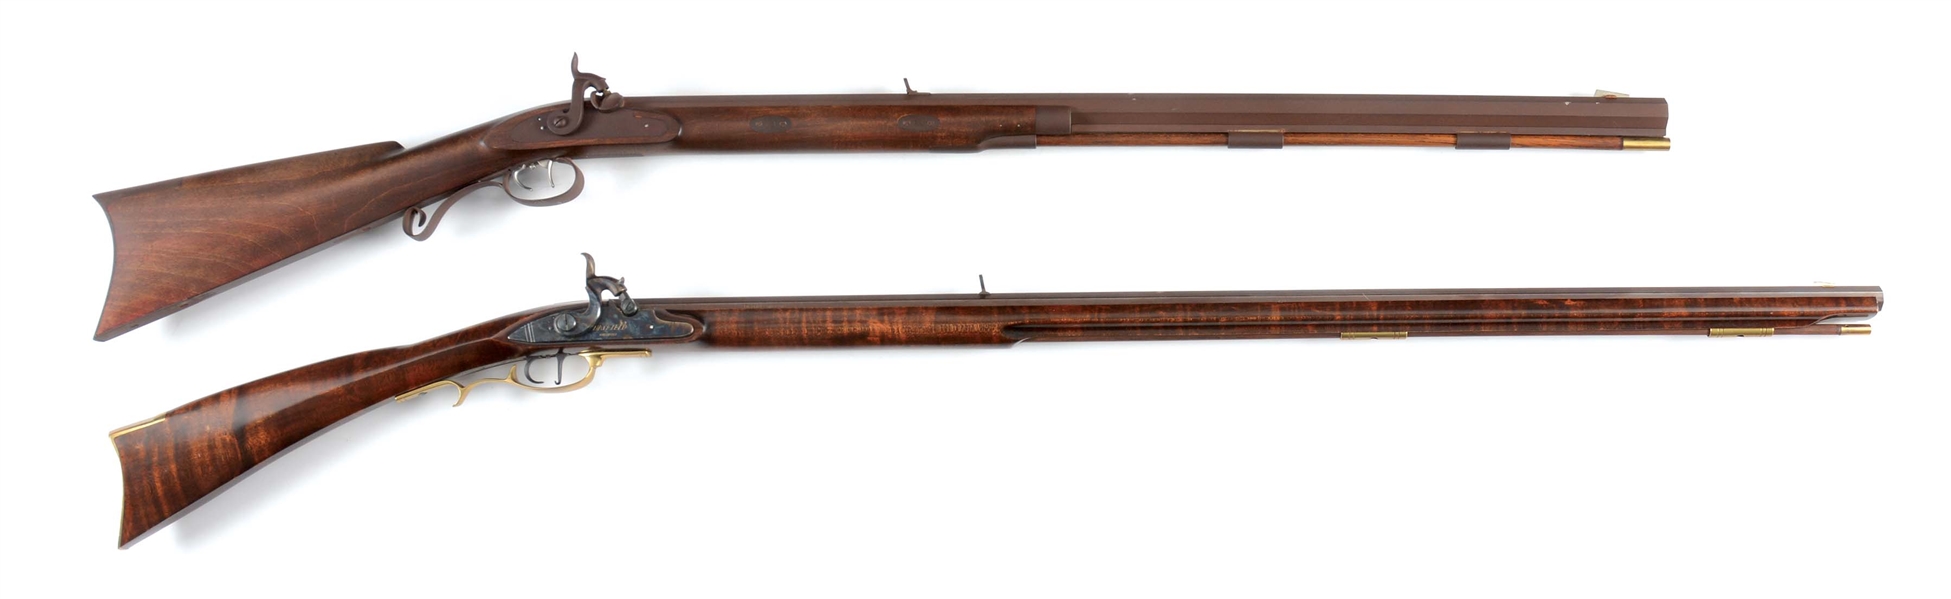 (A) LOT OF TWO: TWO PERCUSSION RIFLES, ONE .54 AND ONE .36 CALIBER.